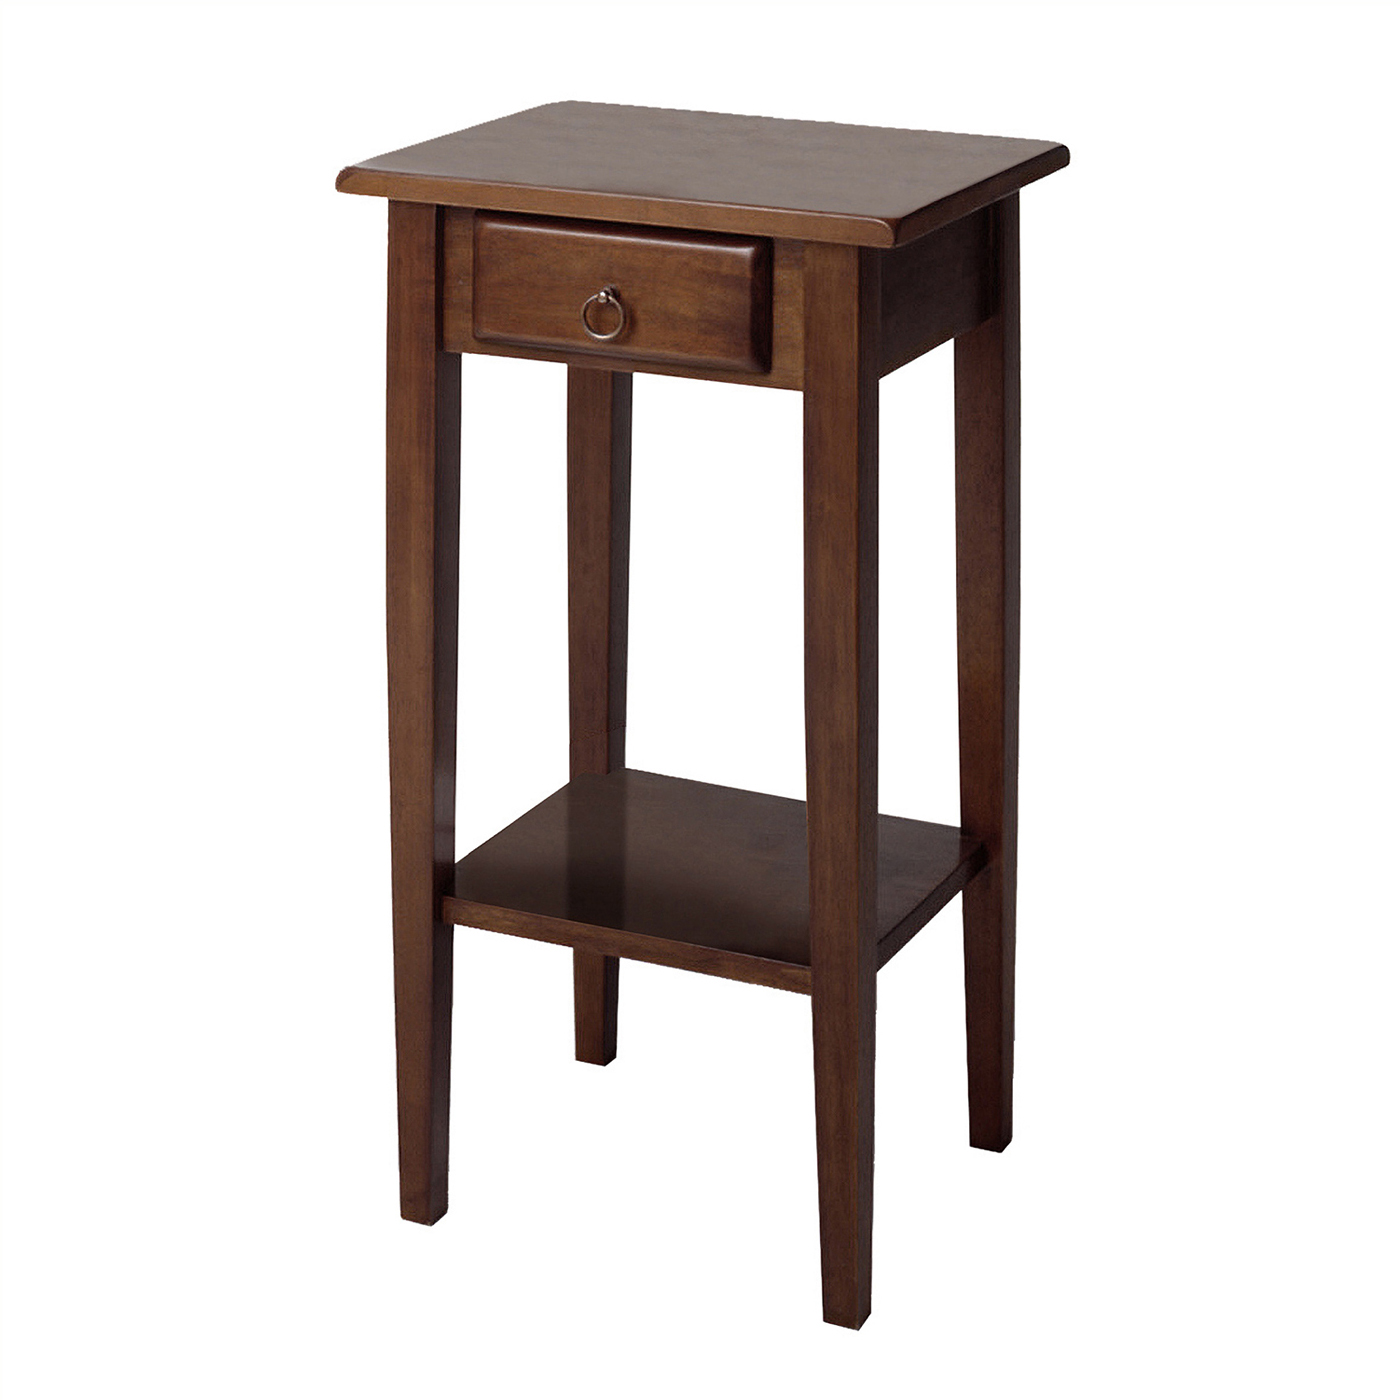 winsome wood regalia plant stand accent table with drawer new phone view larger oak dining furniture white drum coffee corner television west elm mini desk console chest drawers